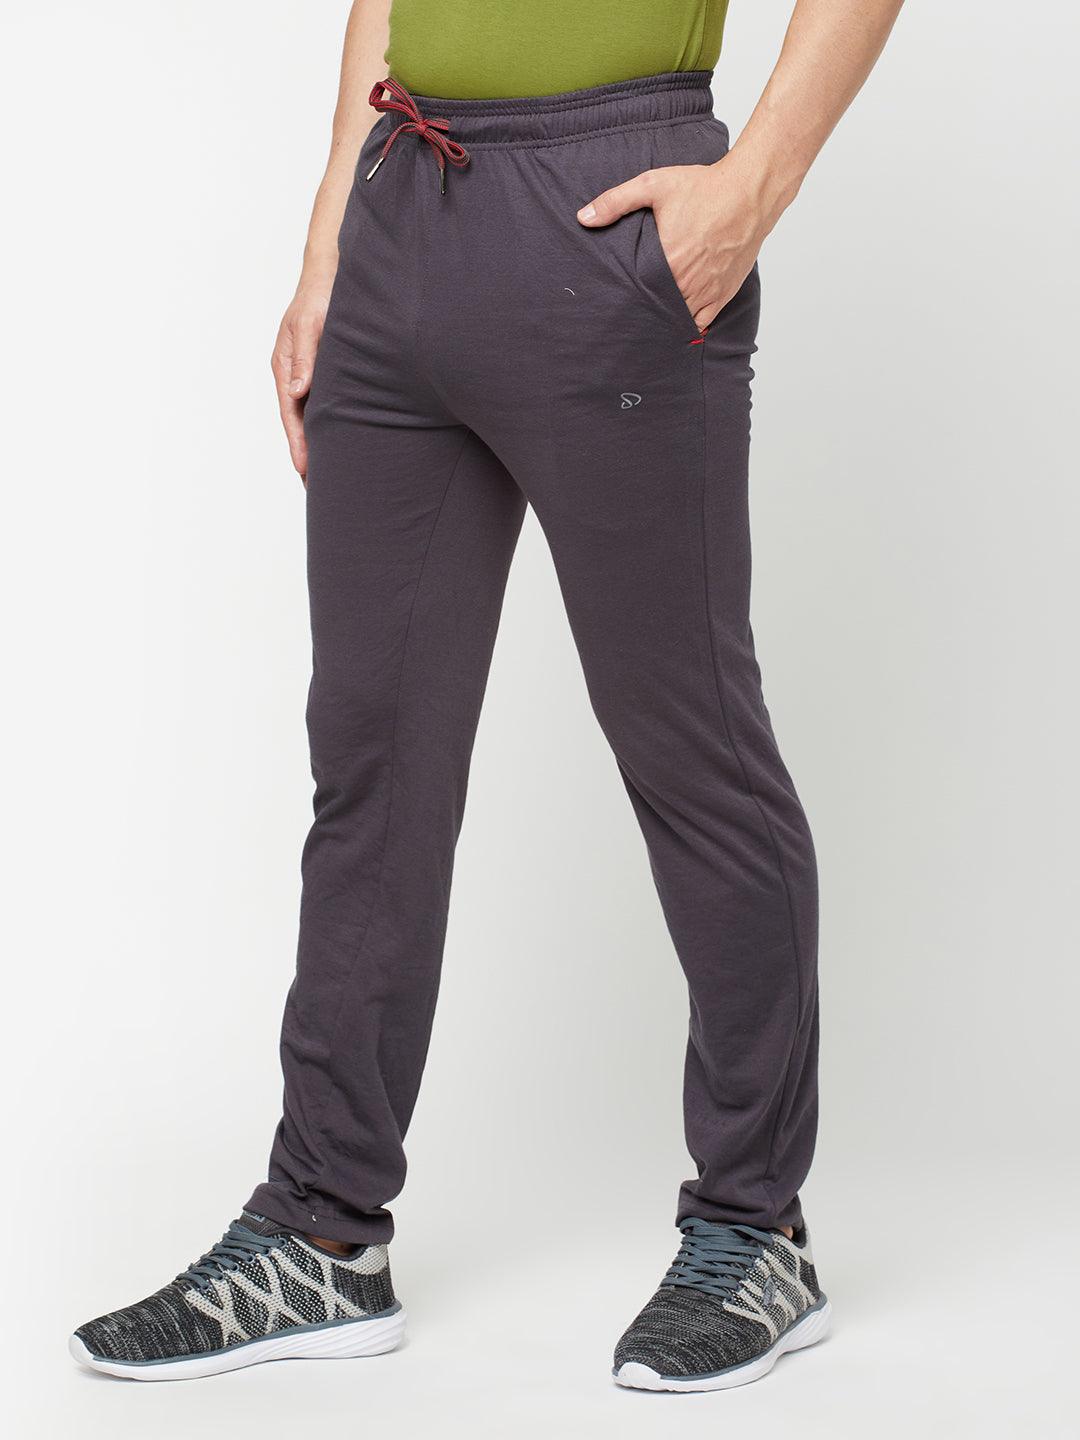 Sporto Men's Regular fit Track Pants 117_Charcoal Denim_X-Large :  Amazon.in: Clothing & Accessories